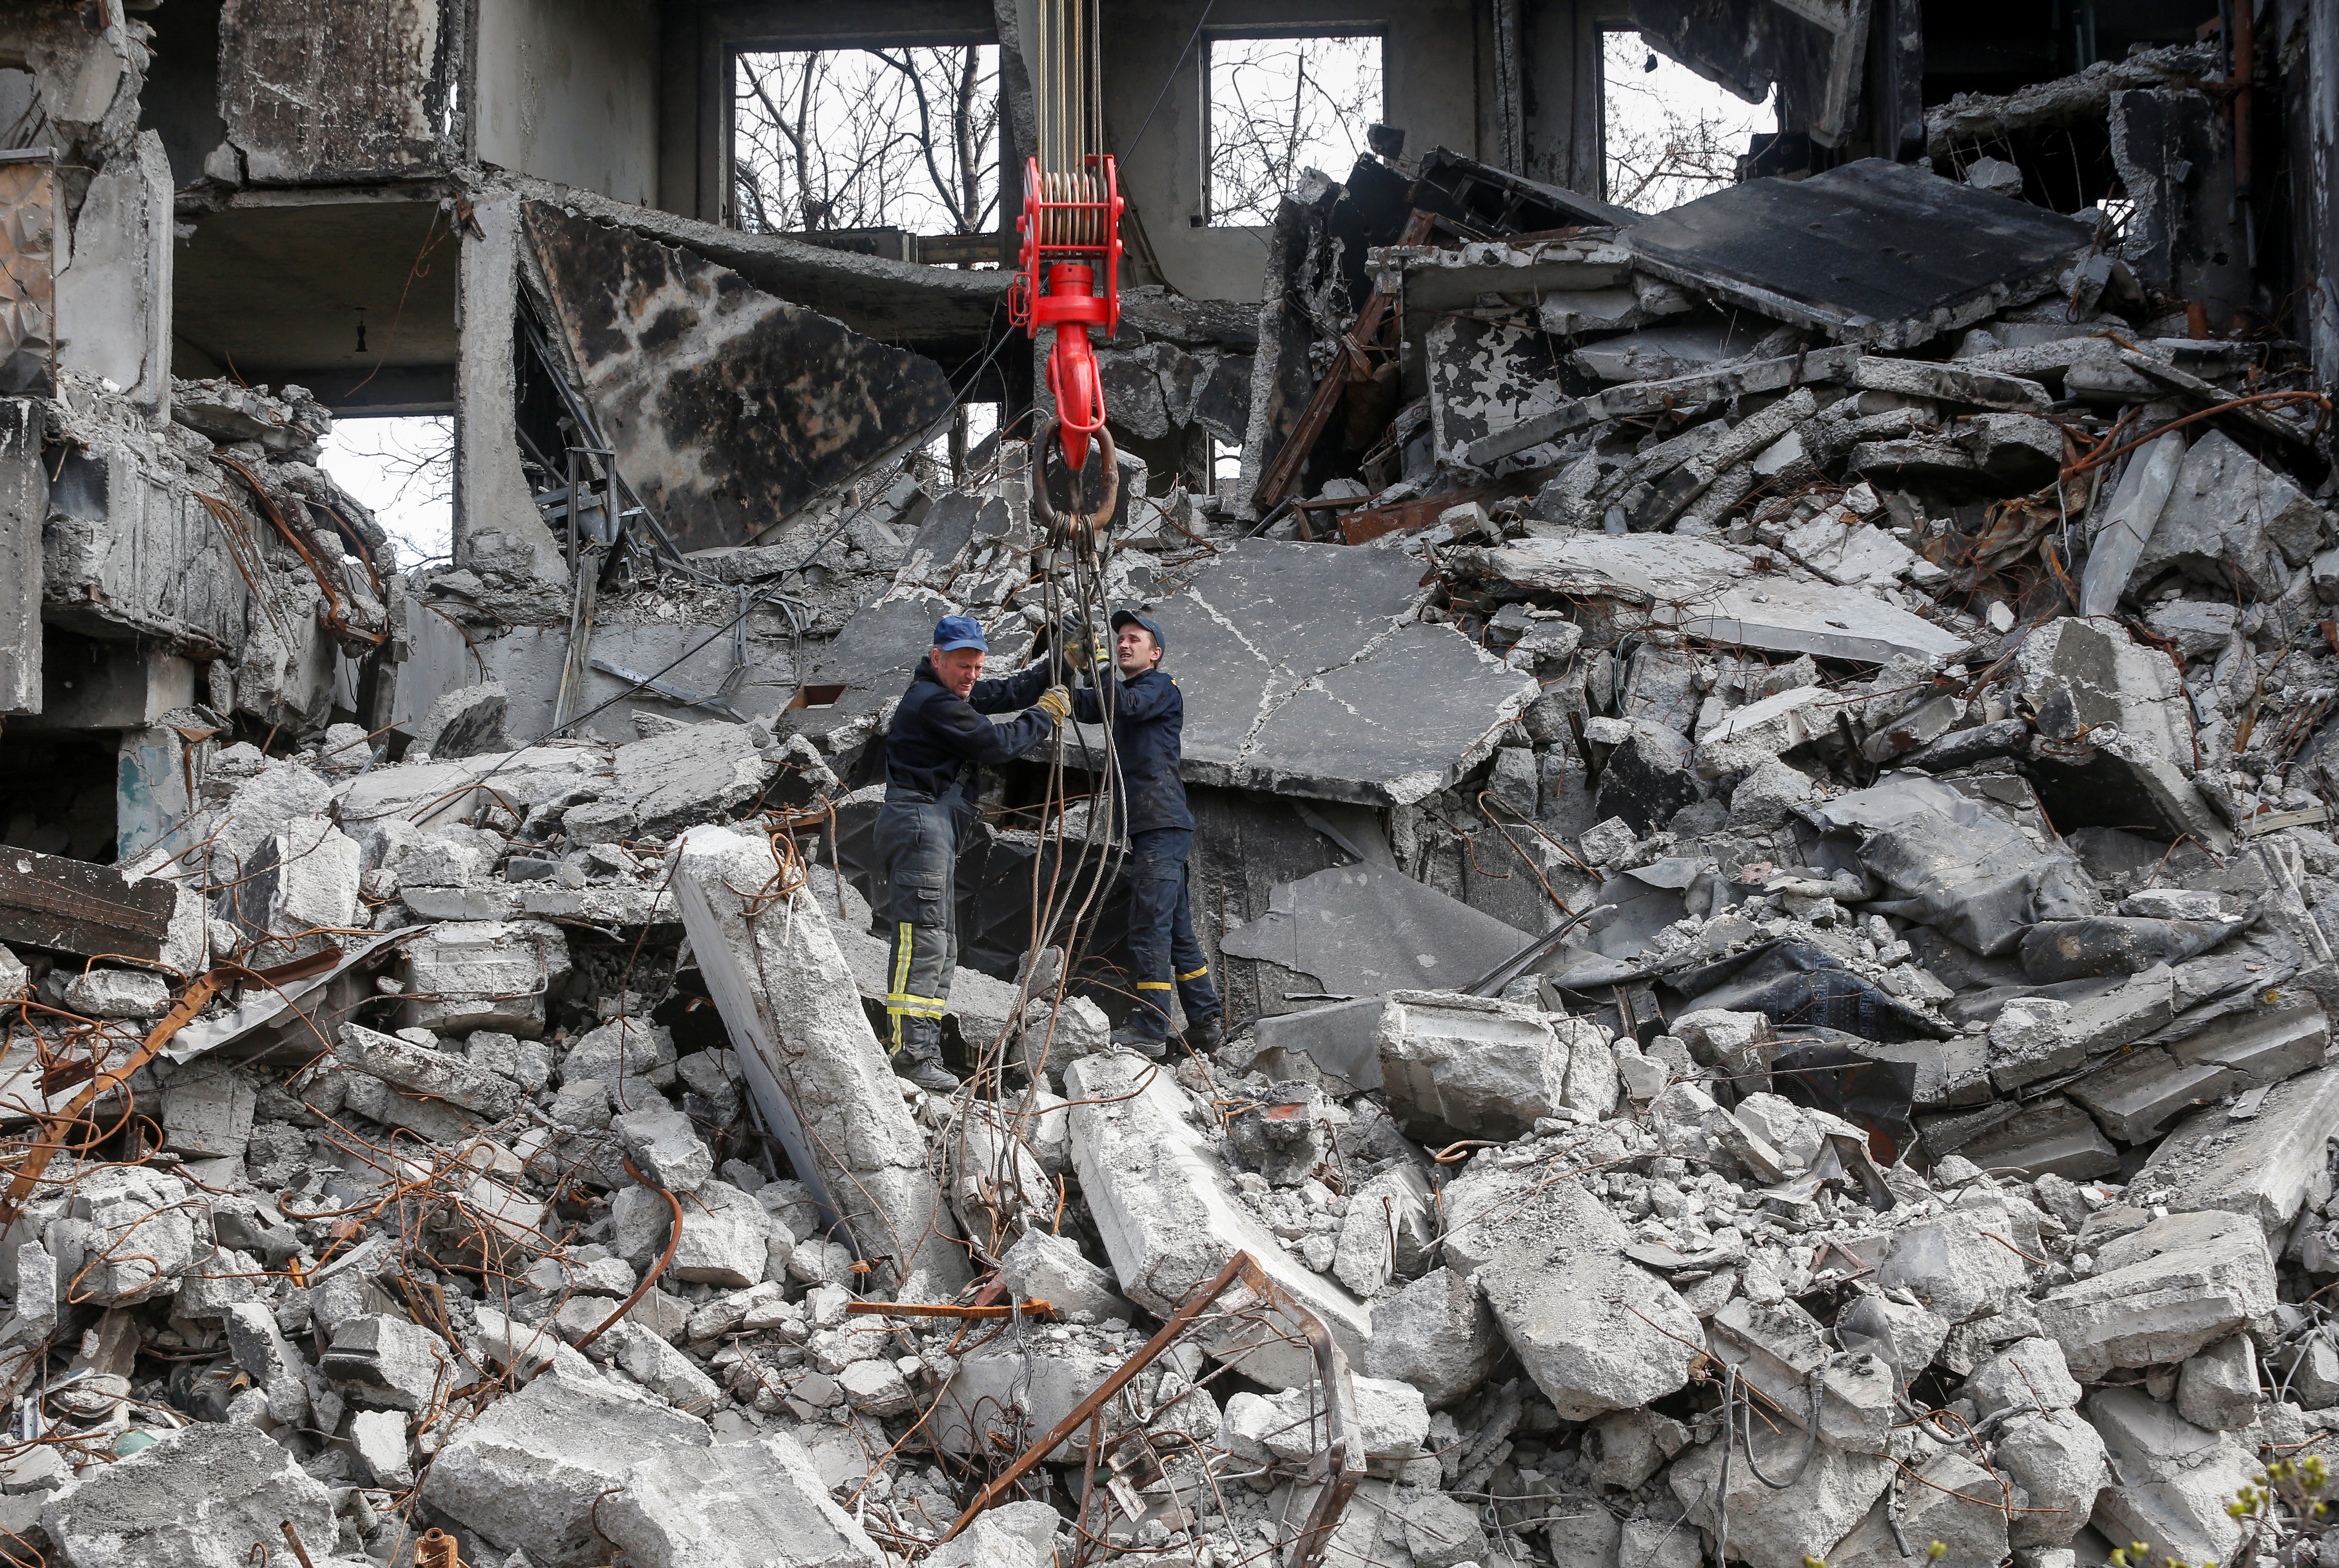 Emergency workers remove debris of a building destroyed in the course of the Ukraine-Russia conflict, in Mariupol